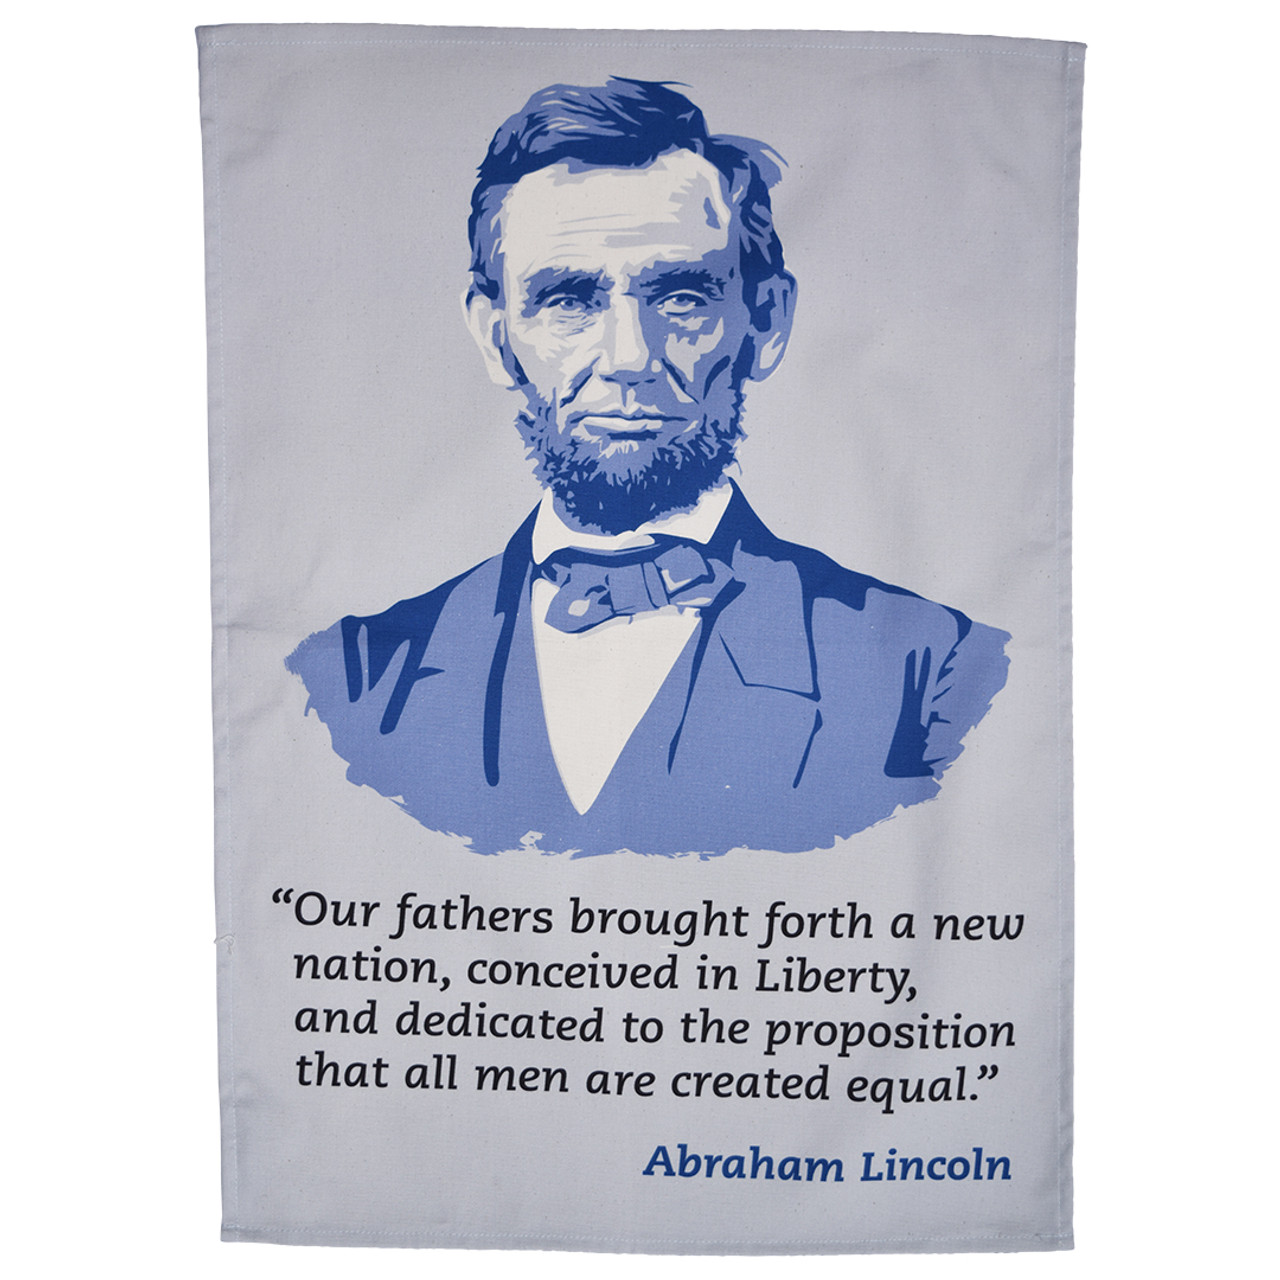 Even Abraham Lincoln knew capitalism wants to eat us : r/LateStageCapitalism